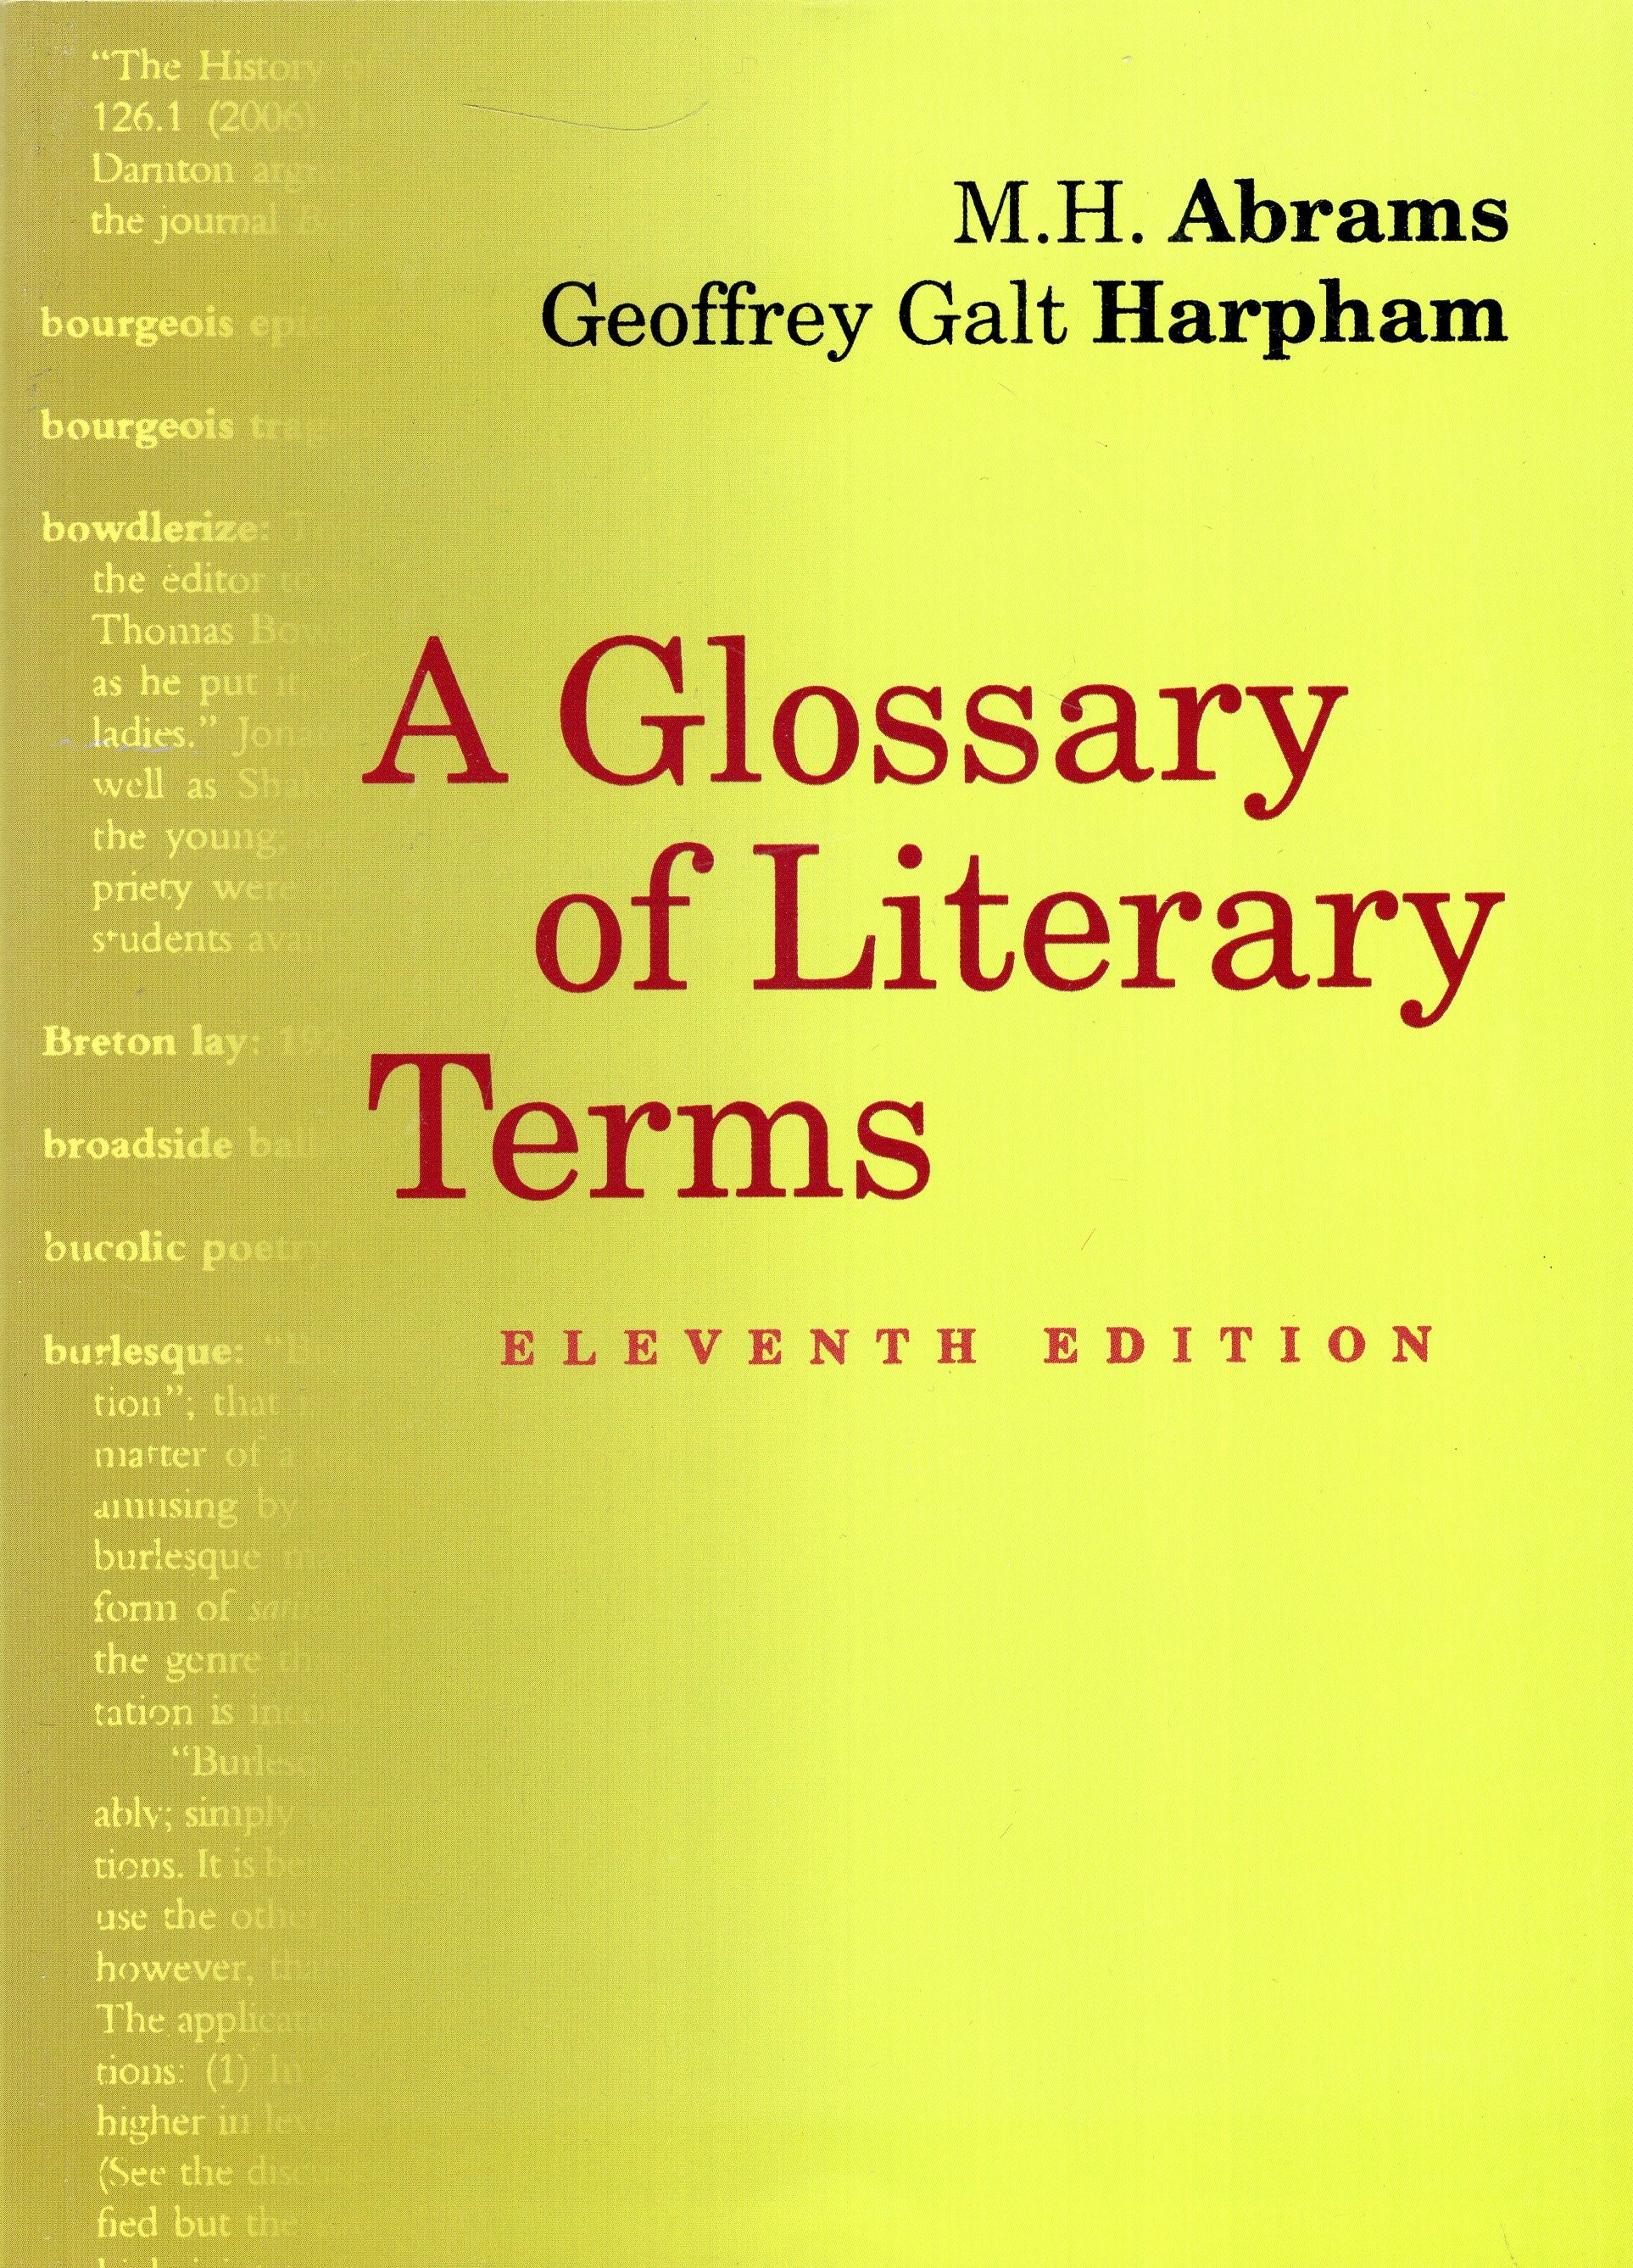 A Glossary of Literary Terms 11th edition(CENGAGE Learning)